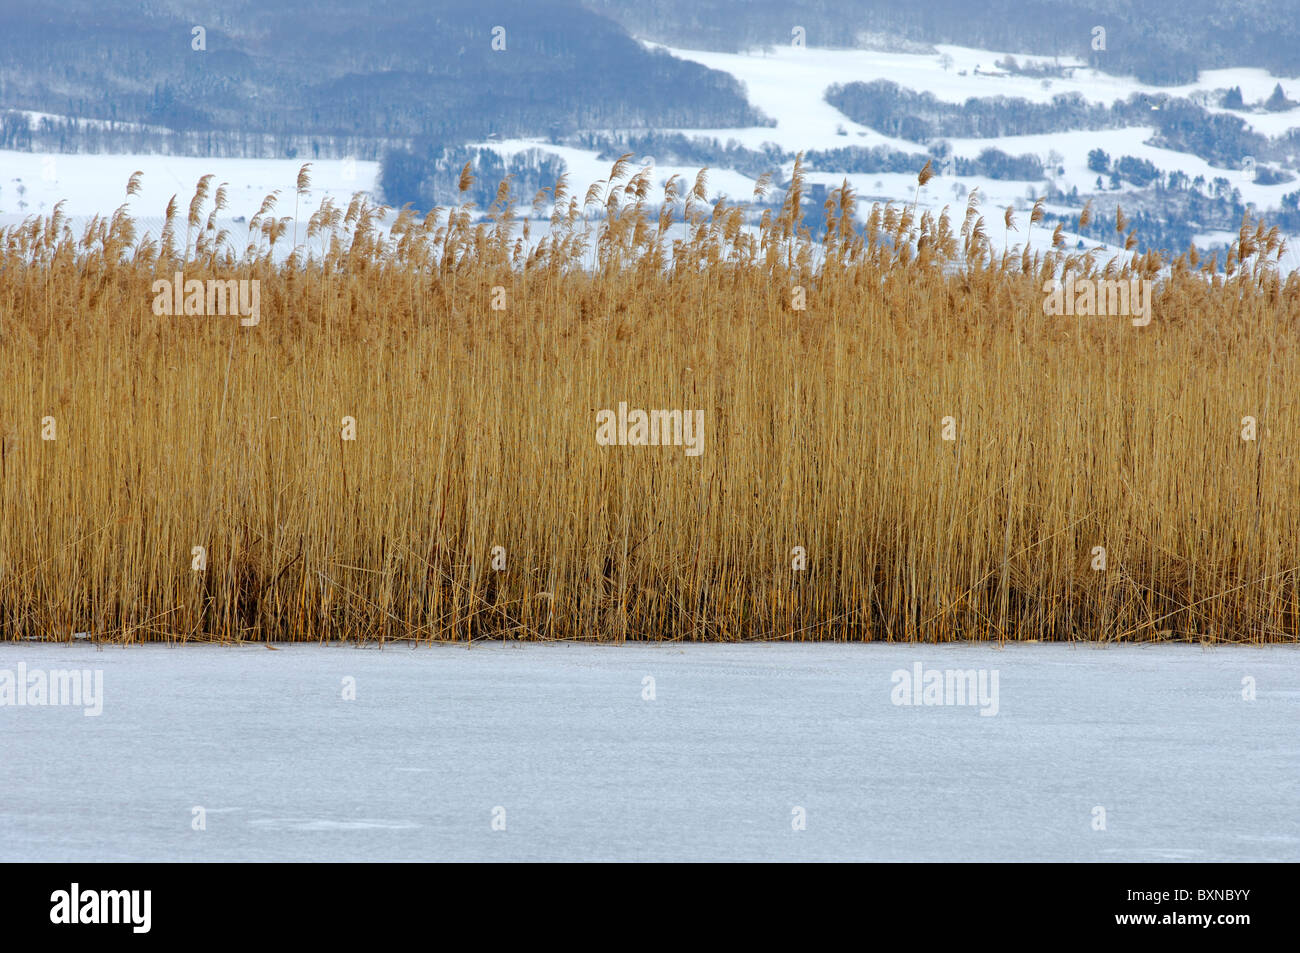 Reed belt in the frozen littoral zone of the winterly Lake of Neuchâtel near Yverdon-les-Bains, canton of Vaud, Switzerland Stock Photo